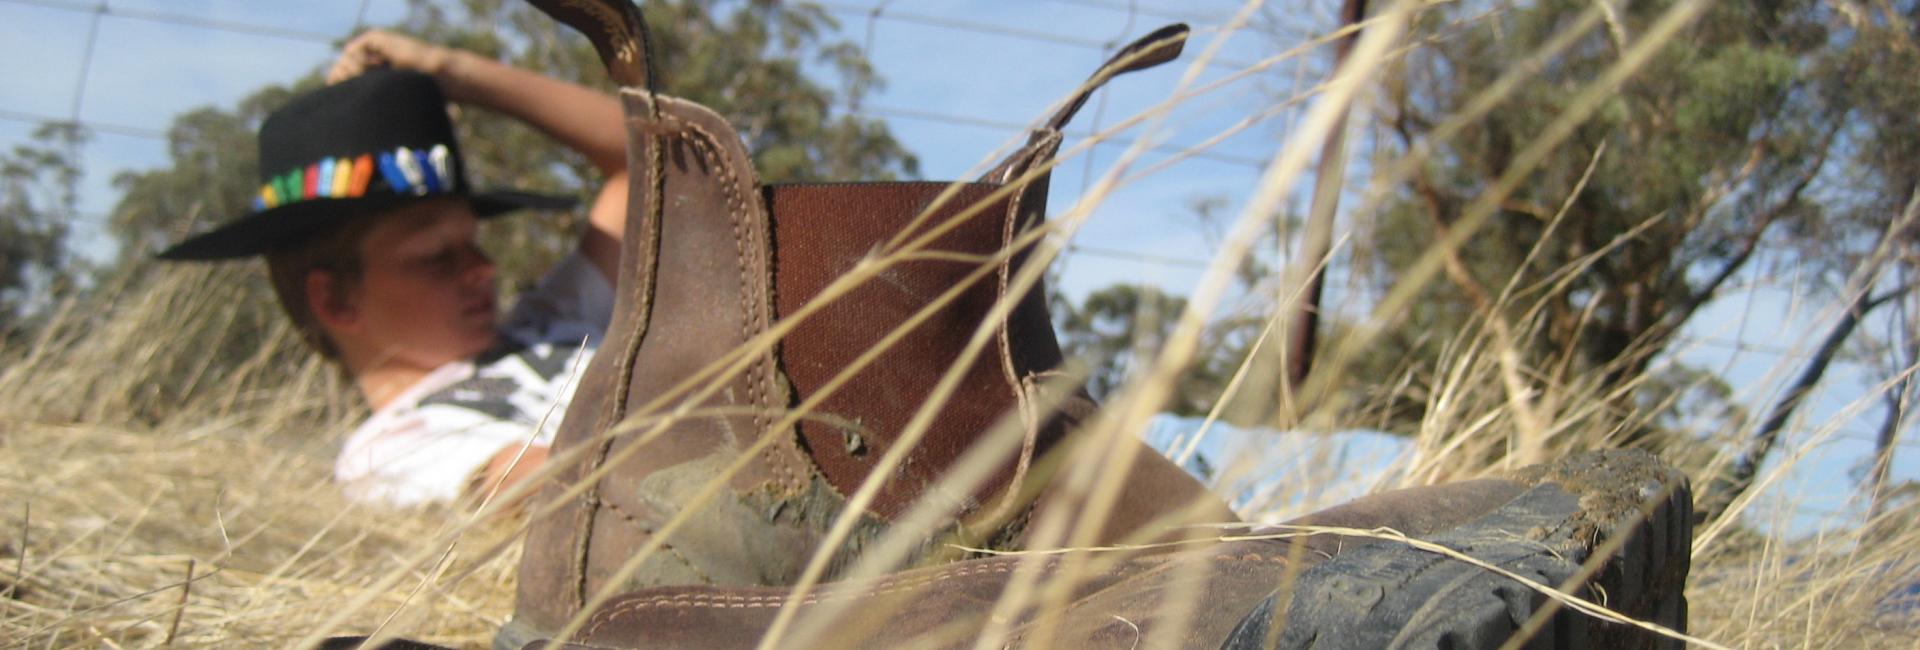 Quairading, Western Australia, Country Life – farm boots and country hat